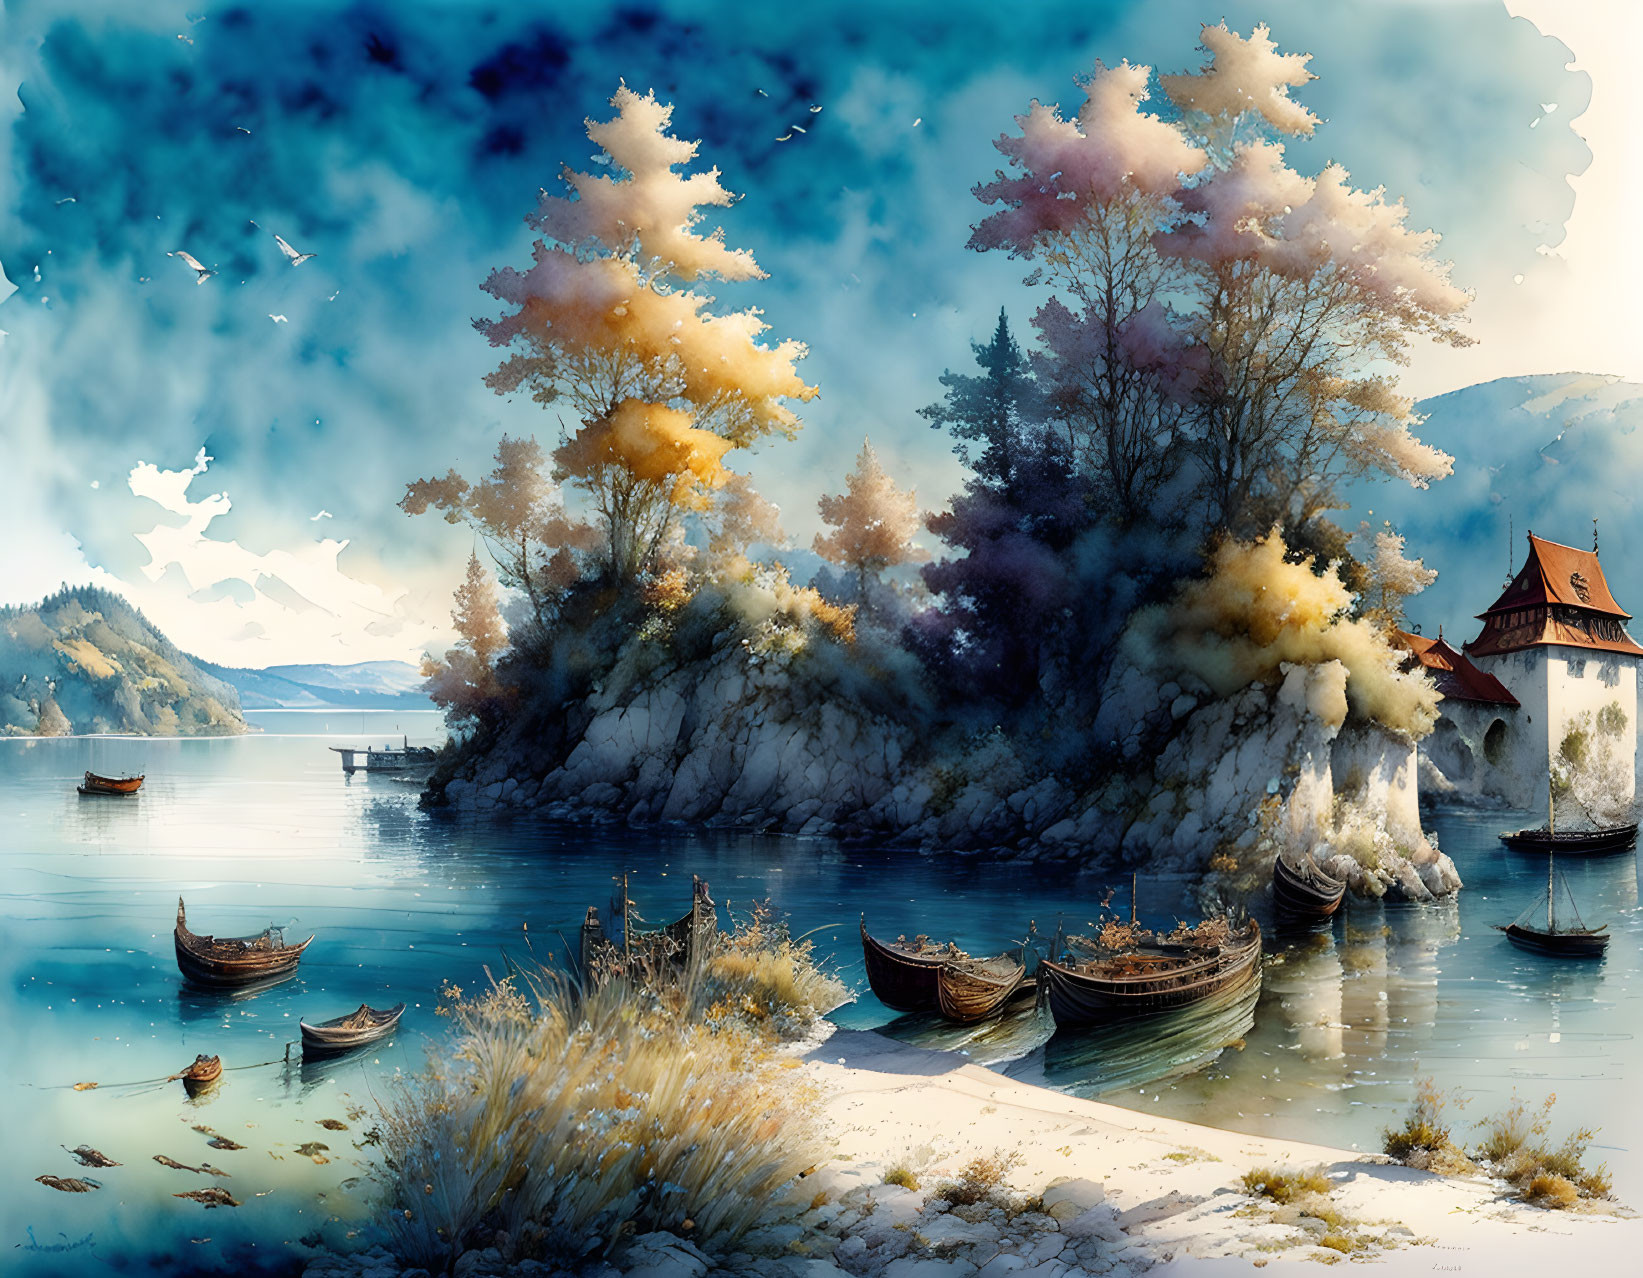 Tranquil lakeside scene with fantasy trees, boats, and traditional house